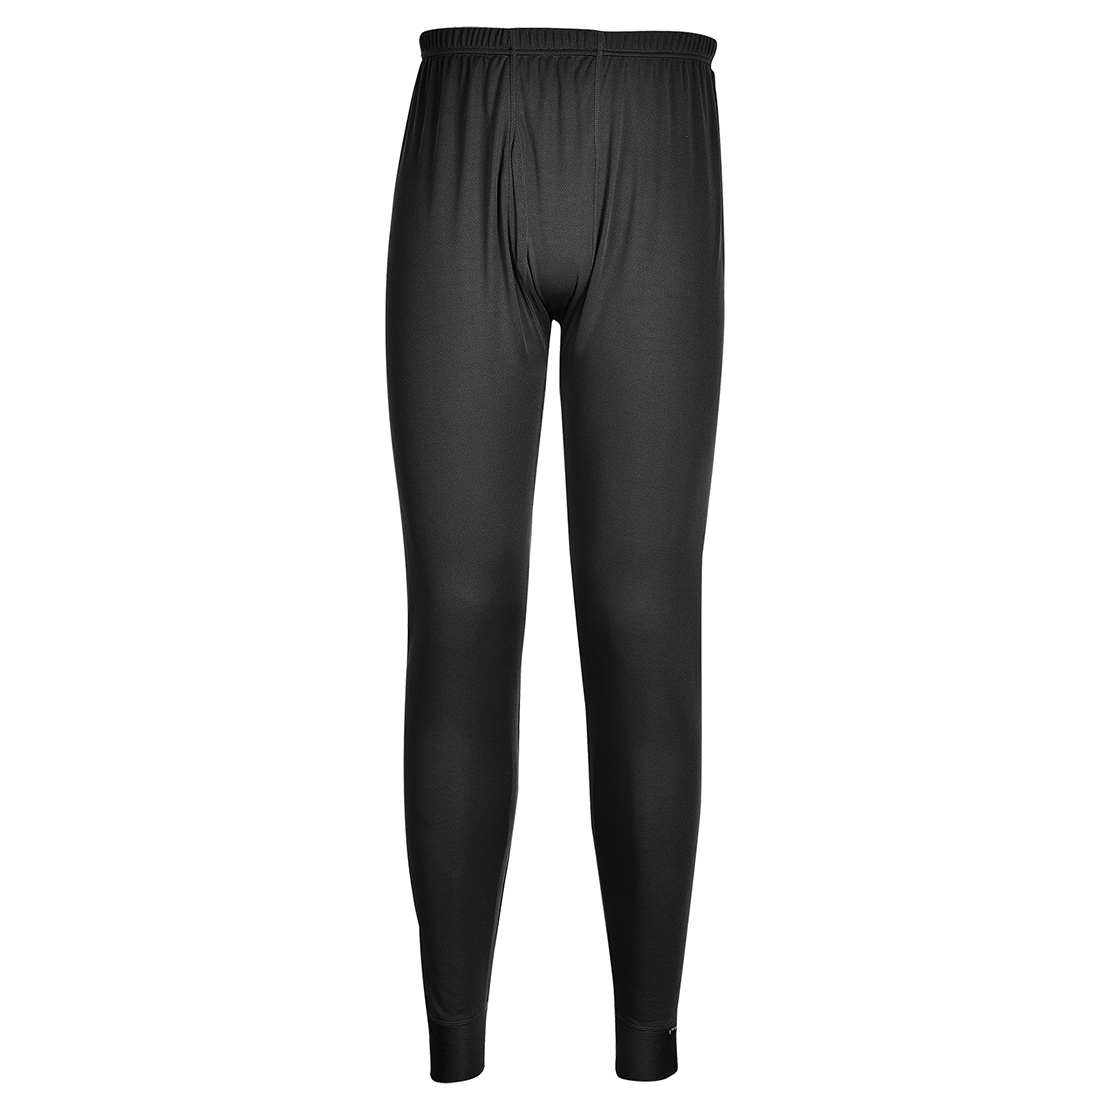 Example image of the thermal baselayer leggings B131 in black with a link to the article.